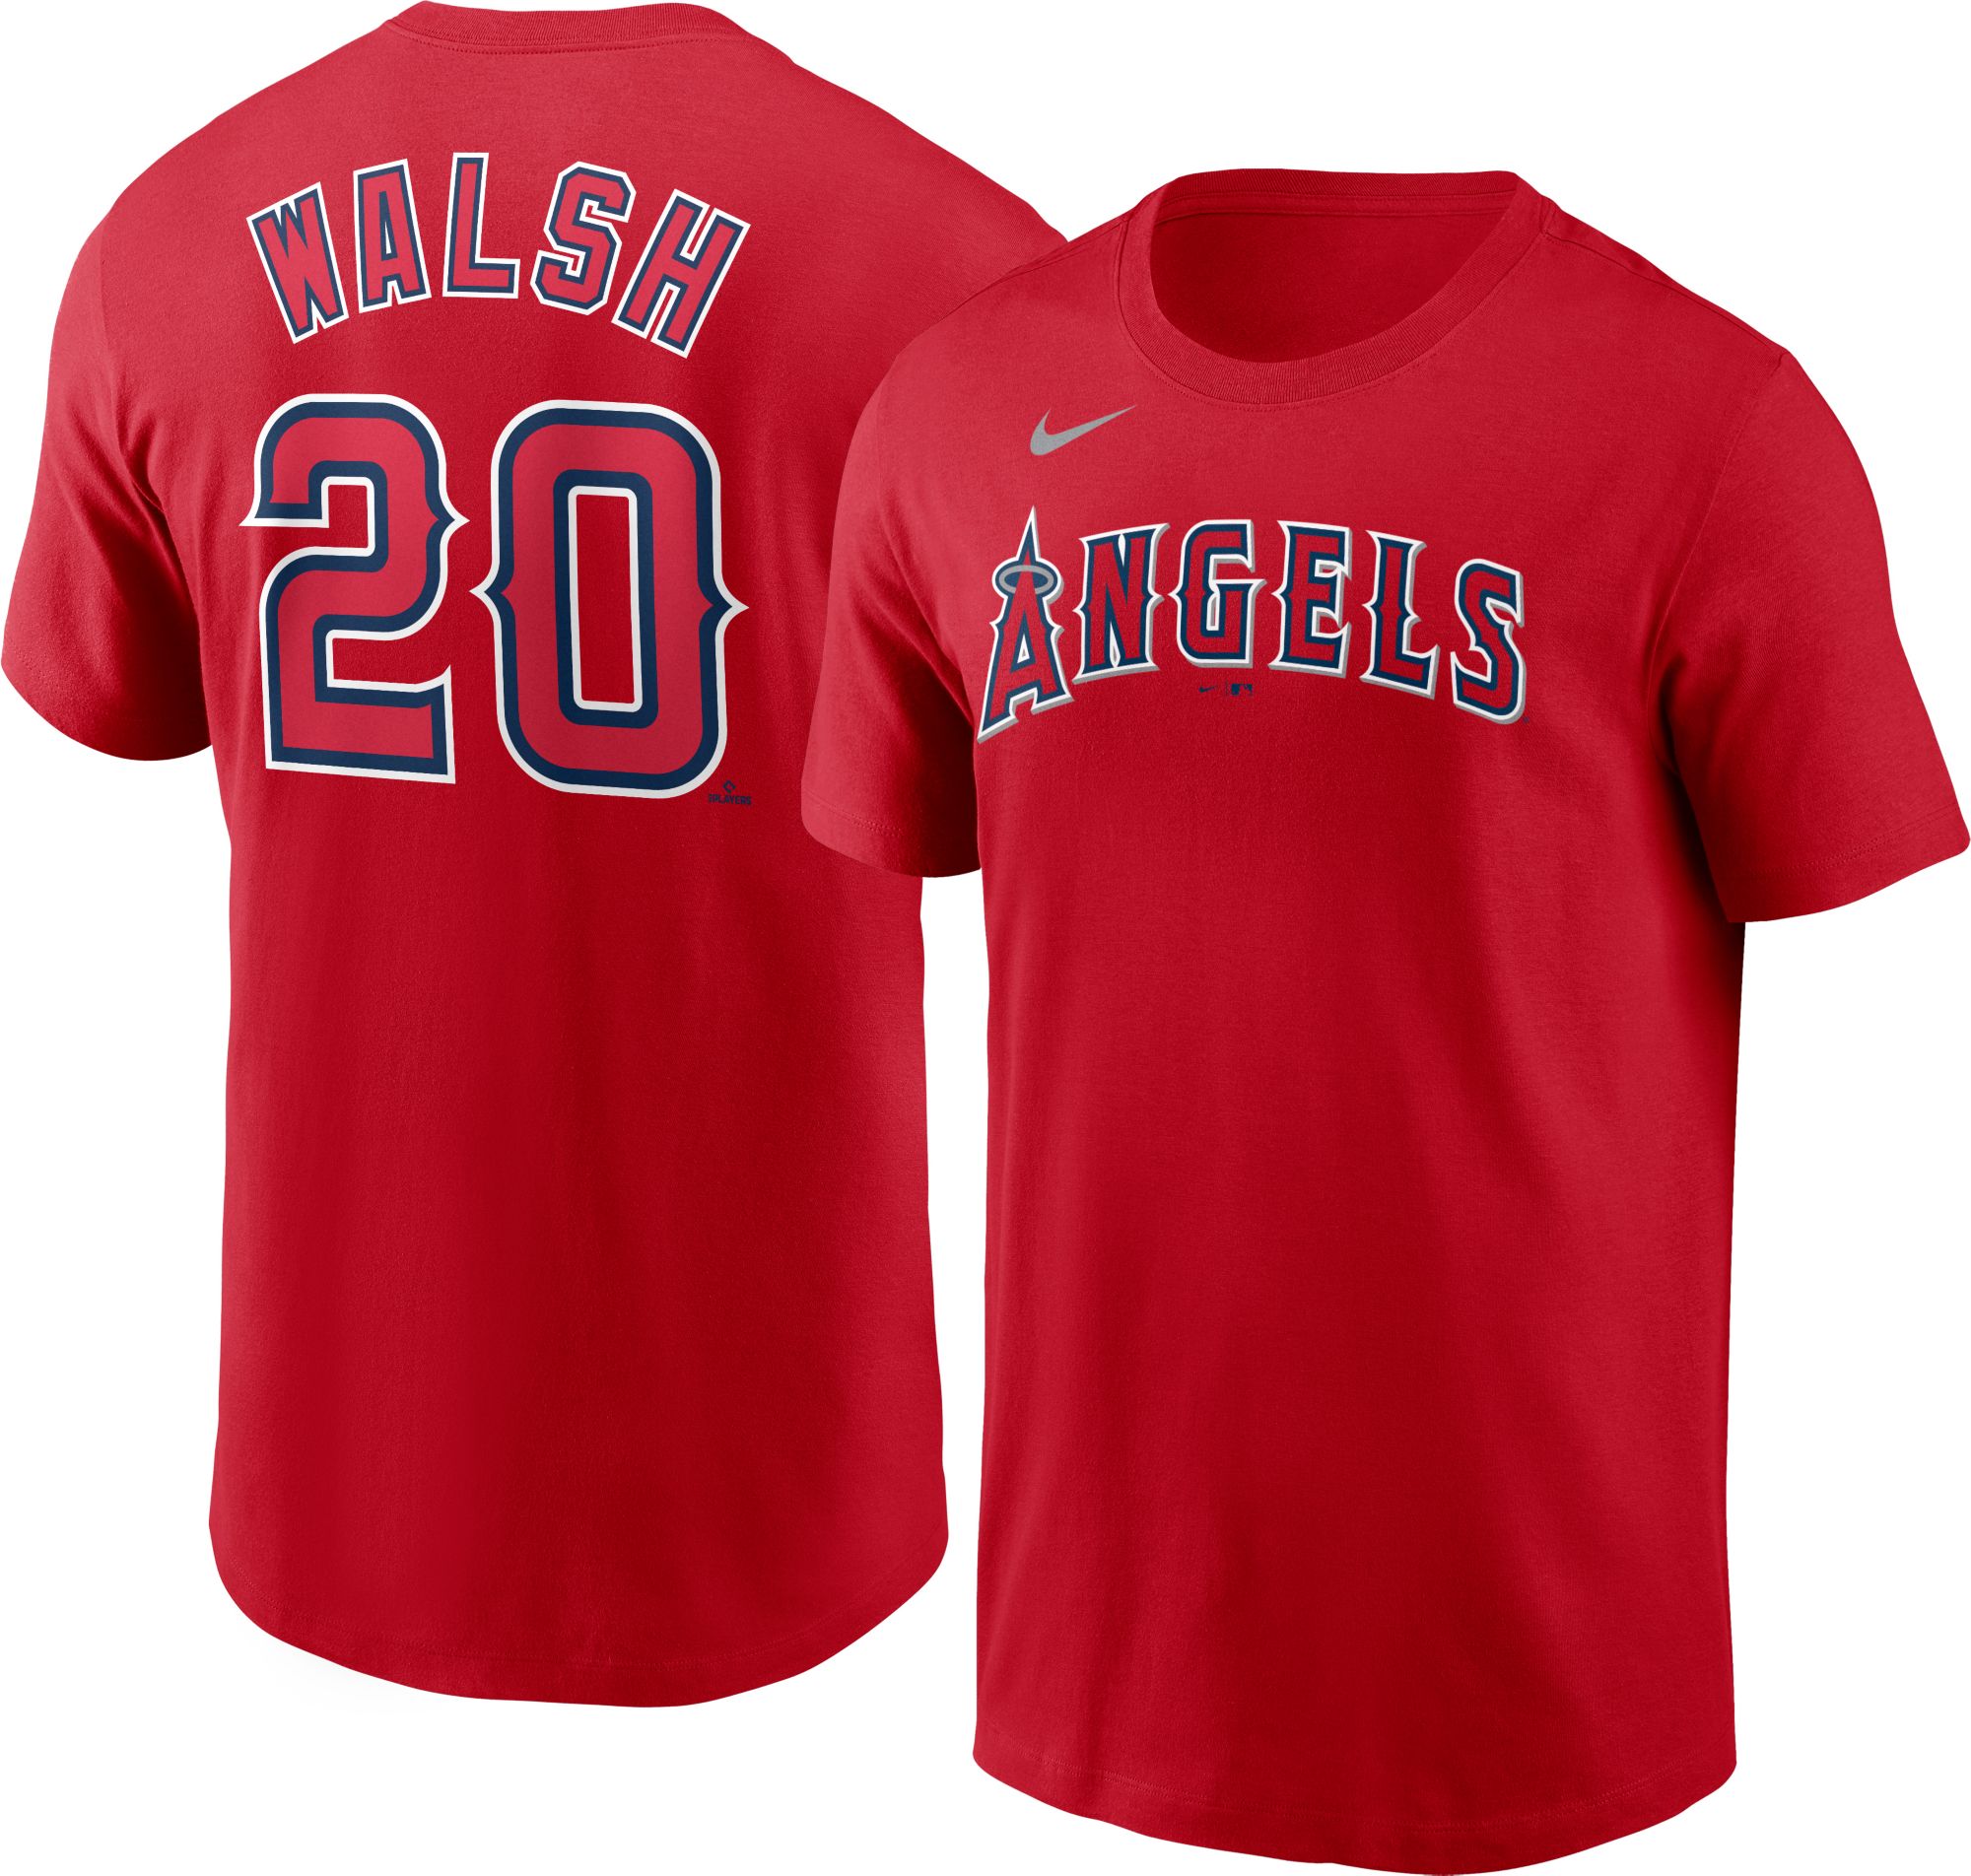 Nike Men's Replica Los Angeles Angels Mike Trout #27 Grey Cool Base Jersey